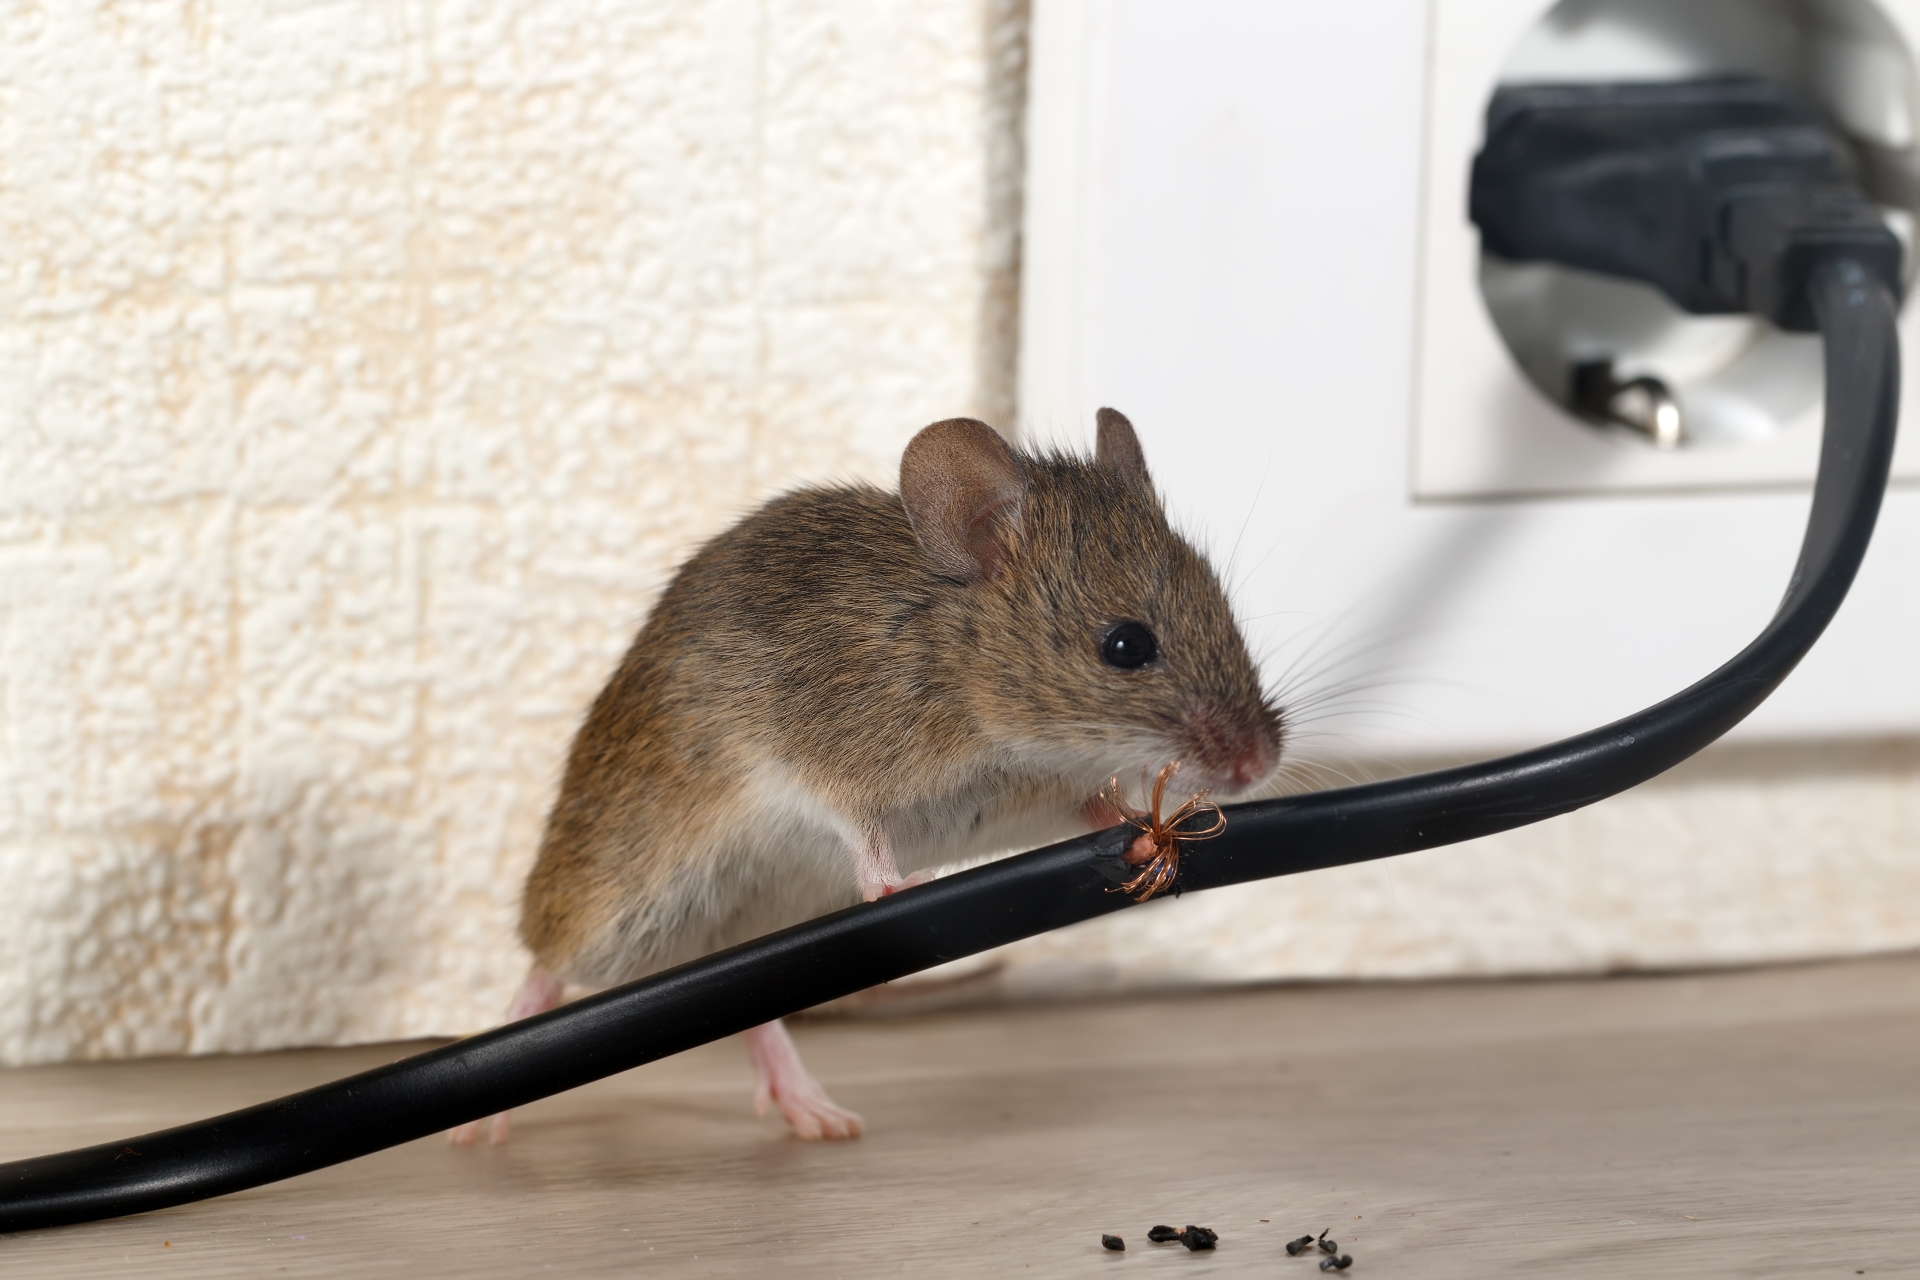 Mice Infestation, Pest Control in Paddington, W2. Call Now 020 8166 9746